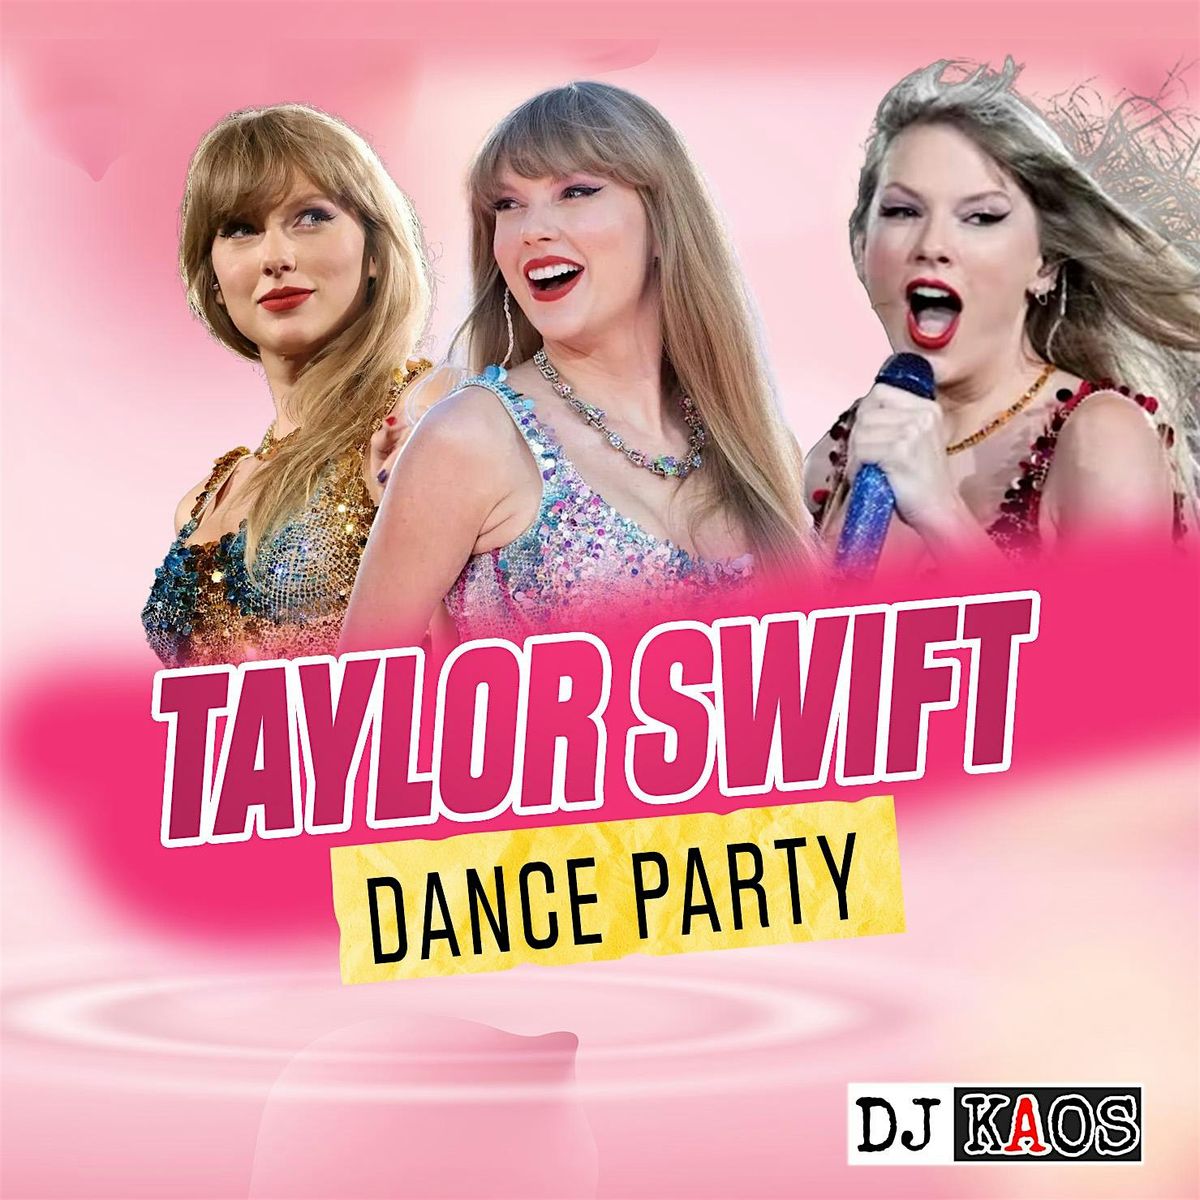 Taylor Swift Dance Party Under the Tent